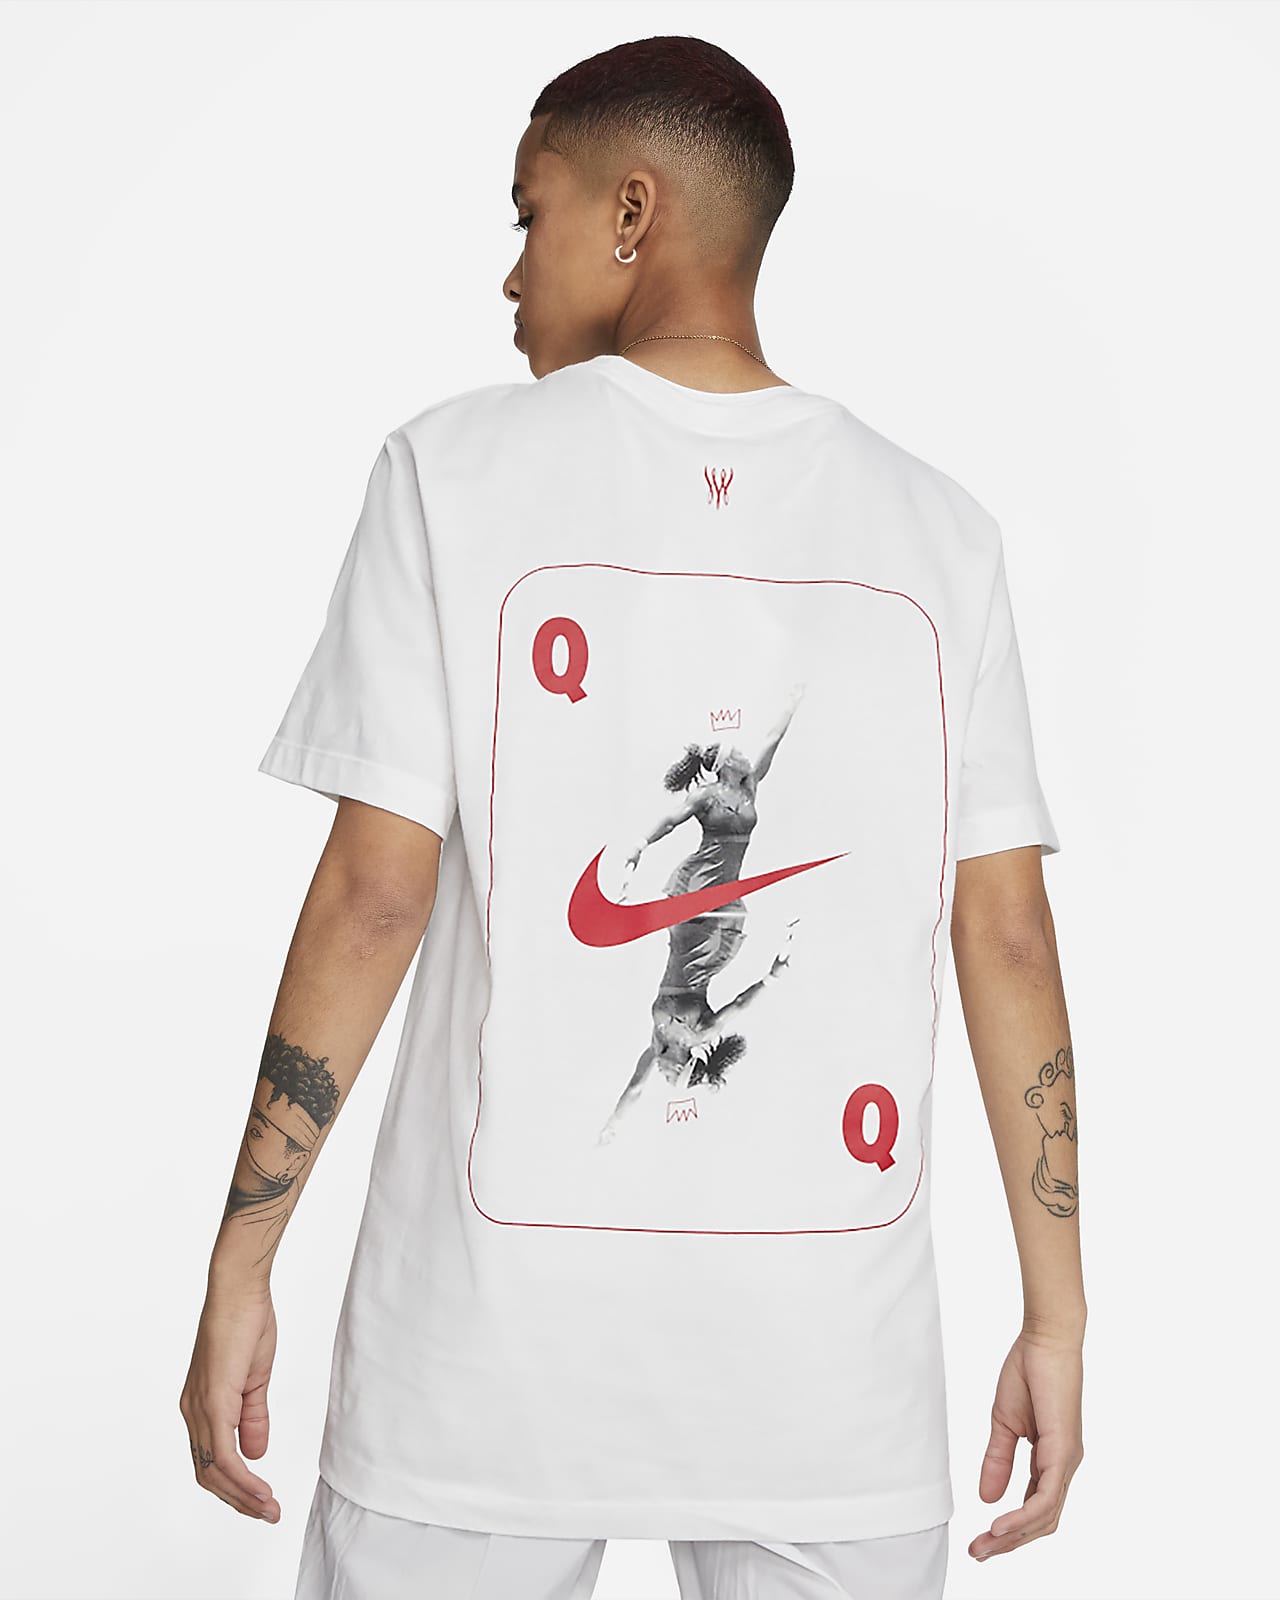 Clerk Be excited Installation Nike Serena Williams Shirt Spain, SAVE 44% - www.fourwoodcapital.com